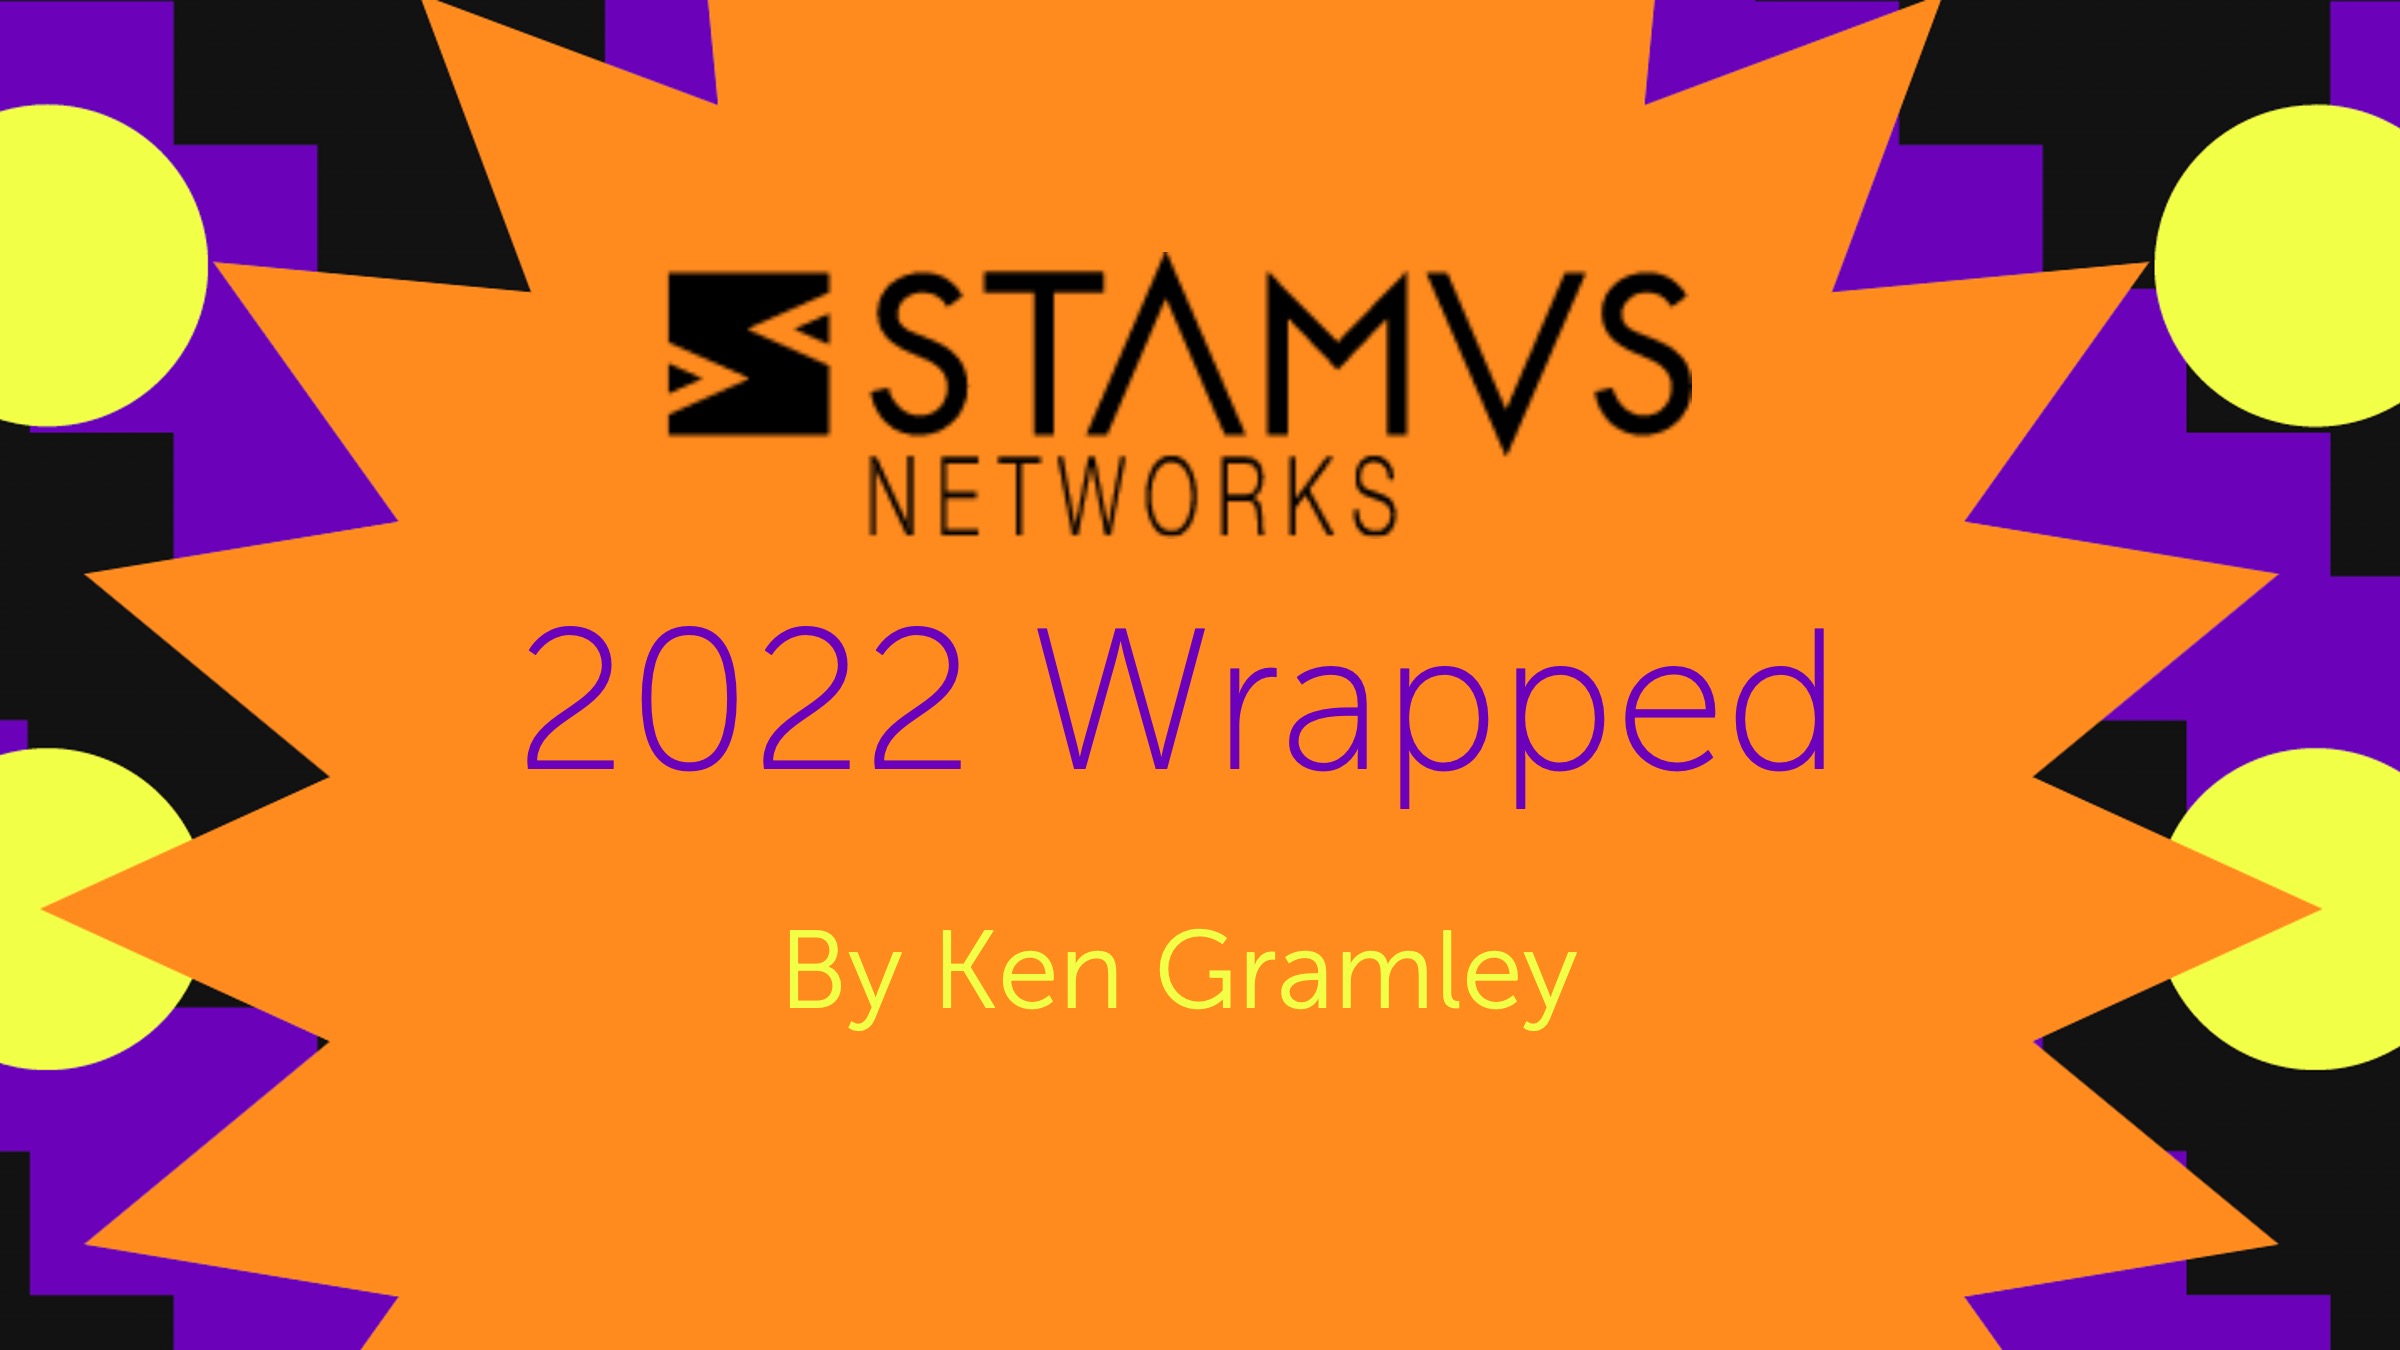 2022 Wrapped by Ken Gramley